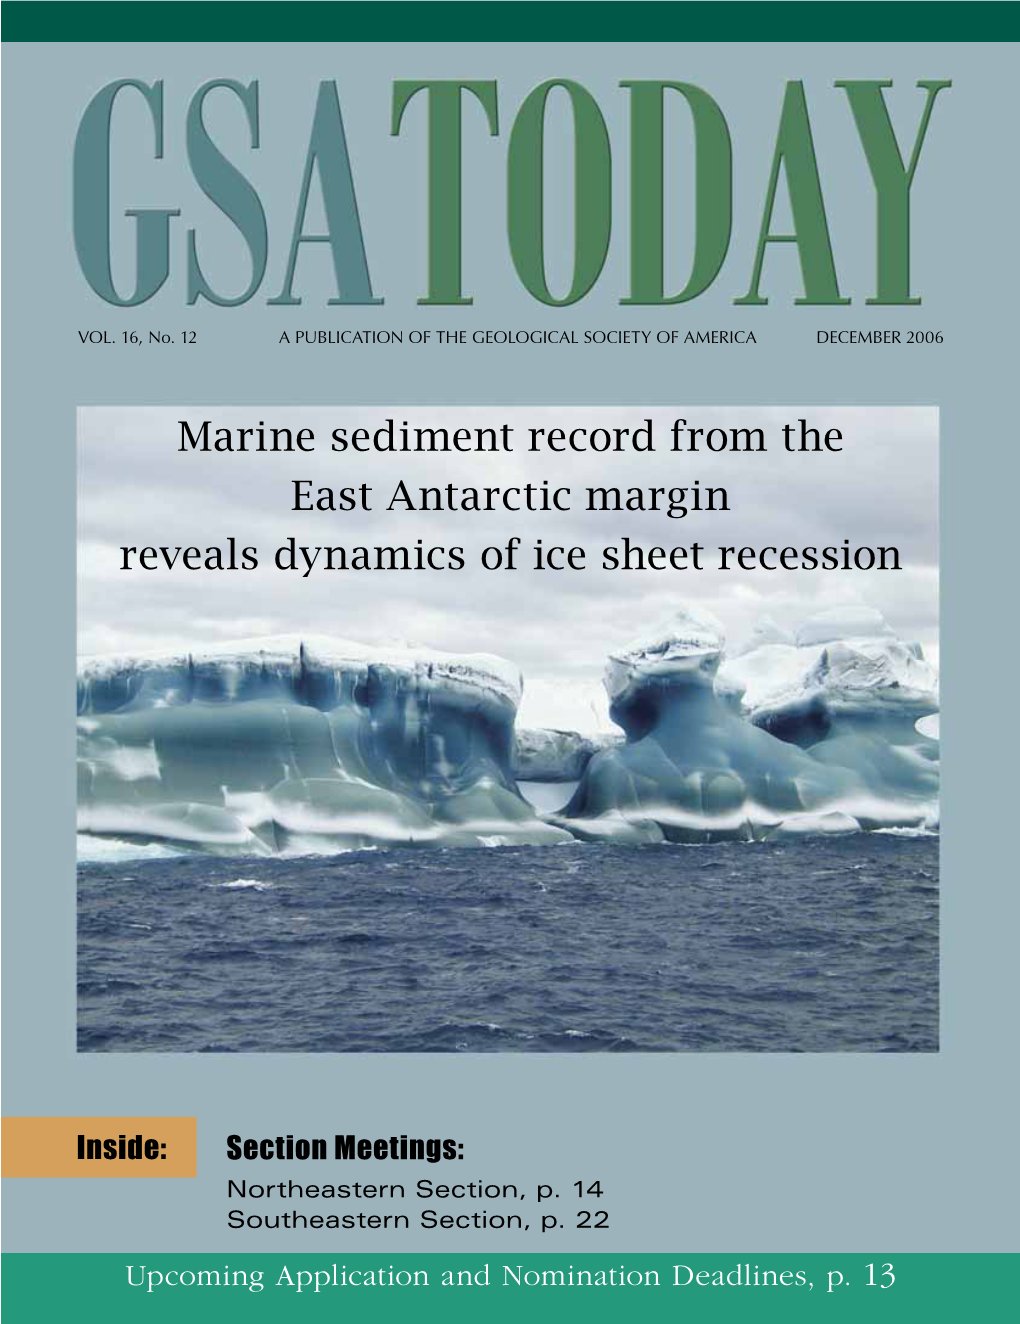 Marine Sediment Record from the East Antarctic Margin Reveals Dynamics of Ice Sheet Recession